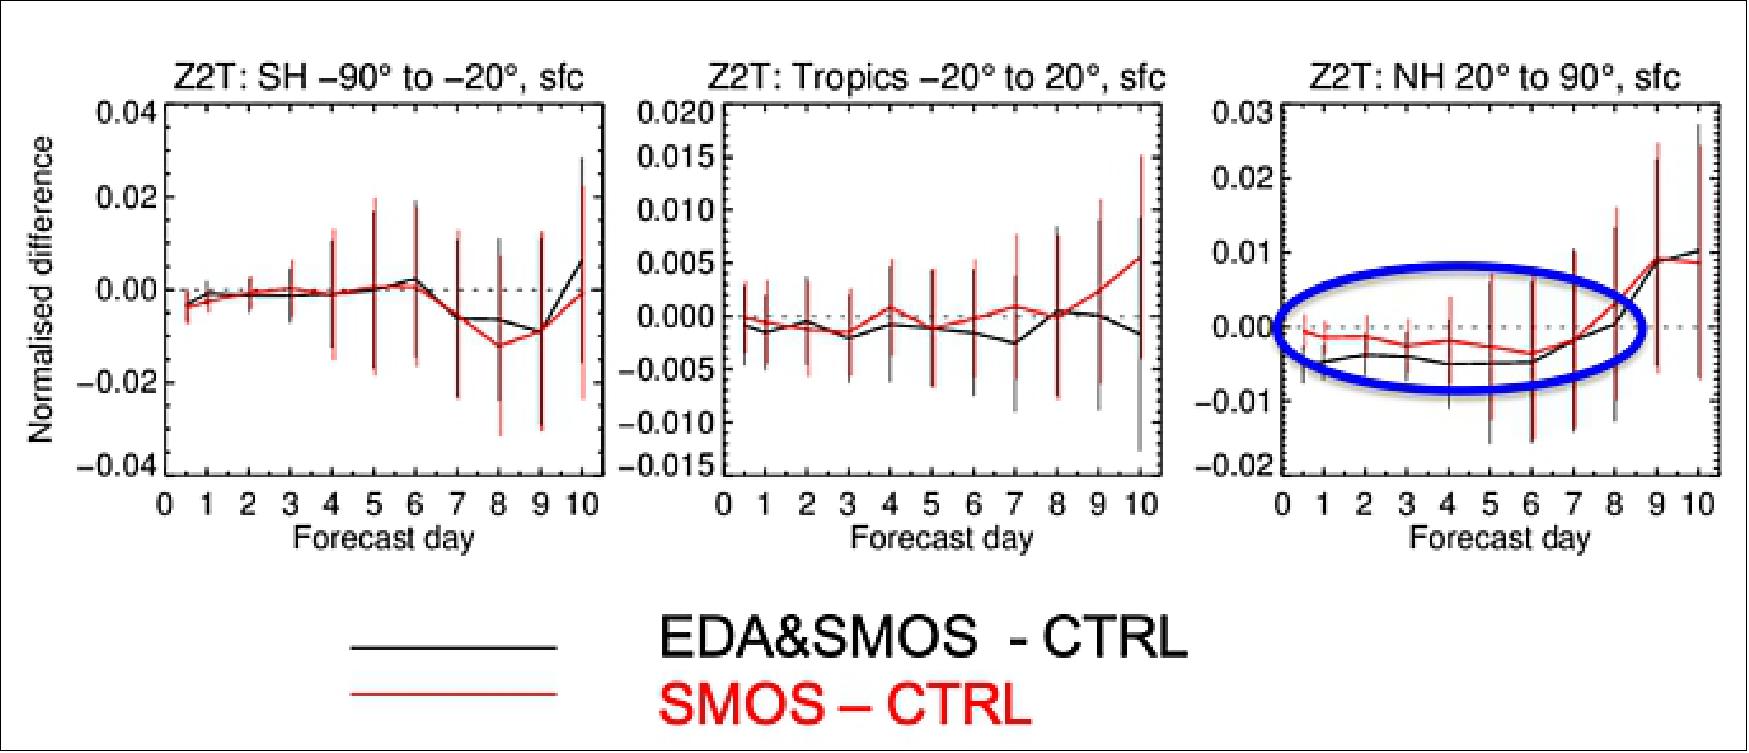 Figure 32: Weather forecast impact. The plots show the normalized error difference of the 2m air temperatures between the new and old forecasting systems, where negative values indicate an error reduction owing to the use of SMOS data. In summer 2017, a positive impact is statistically significant for the Northern Hemisphere, as seen in the right plot (image credit: ECMWF)